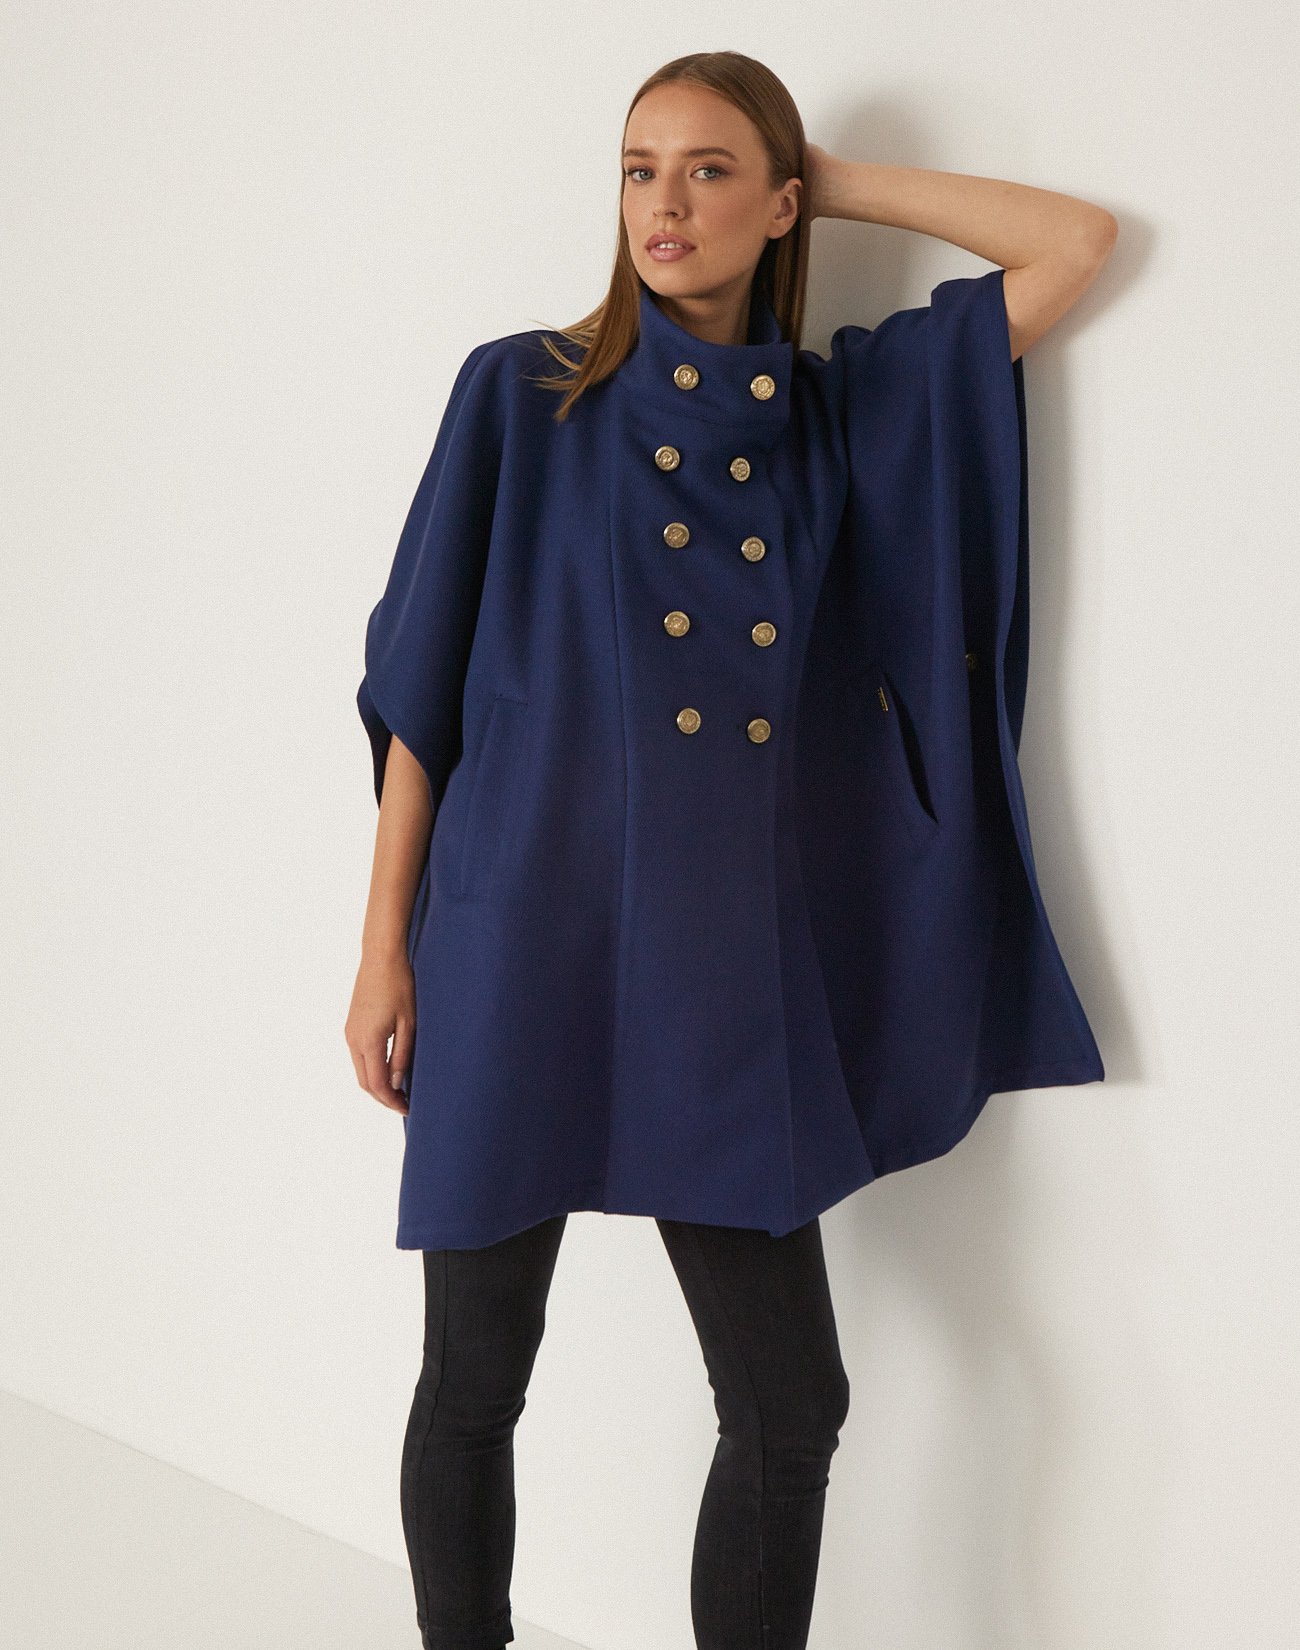 Cape with gold buttons